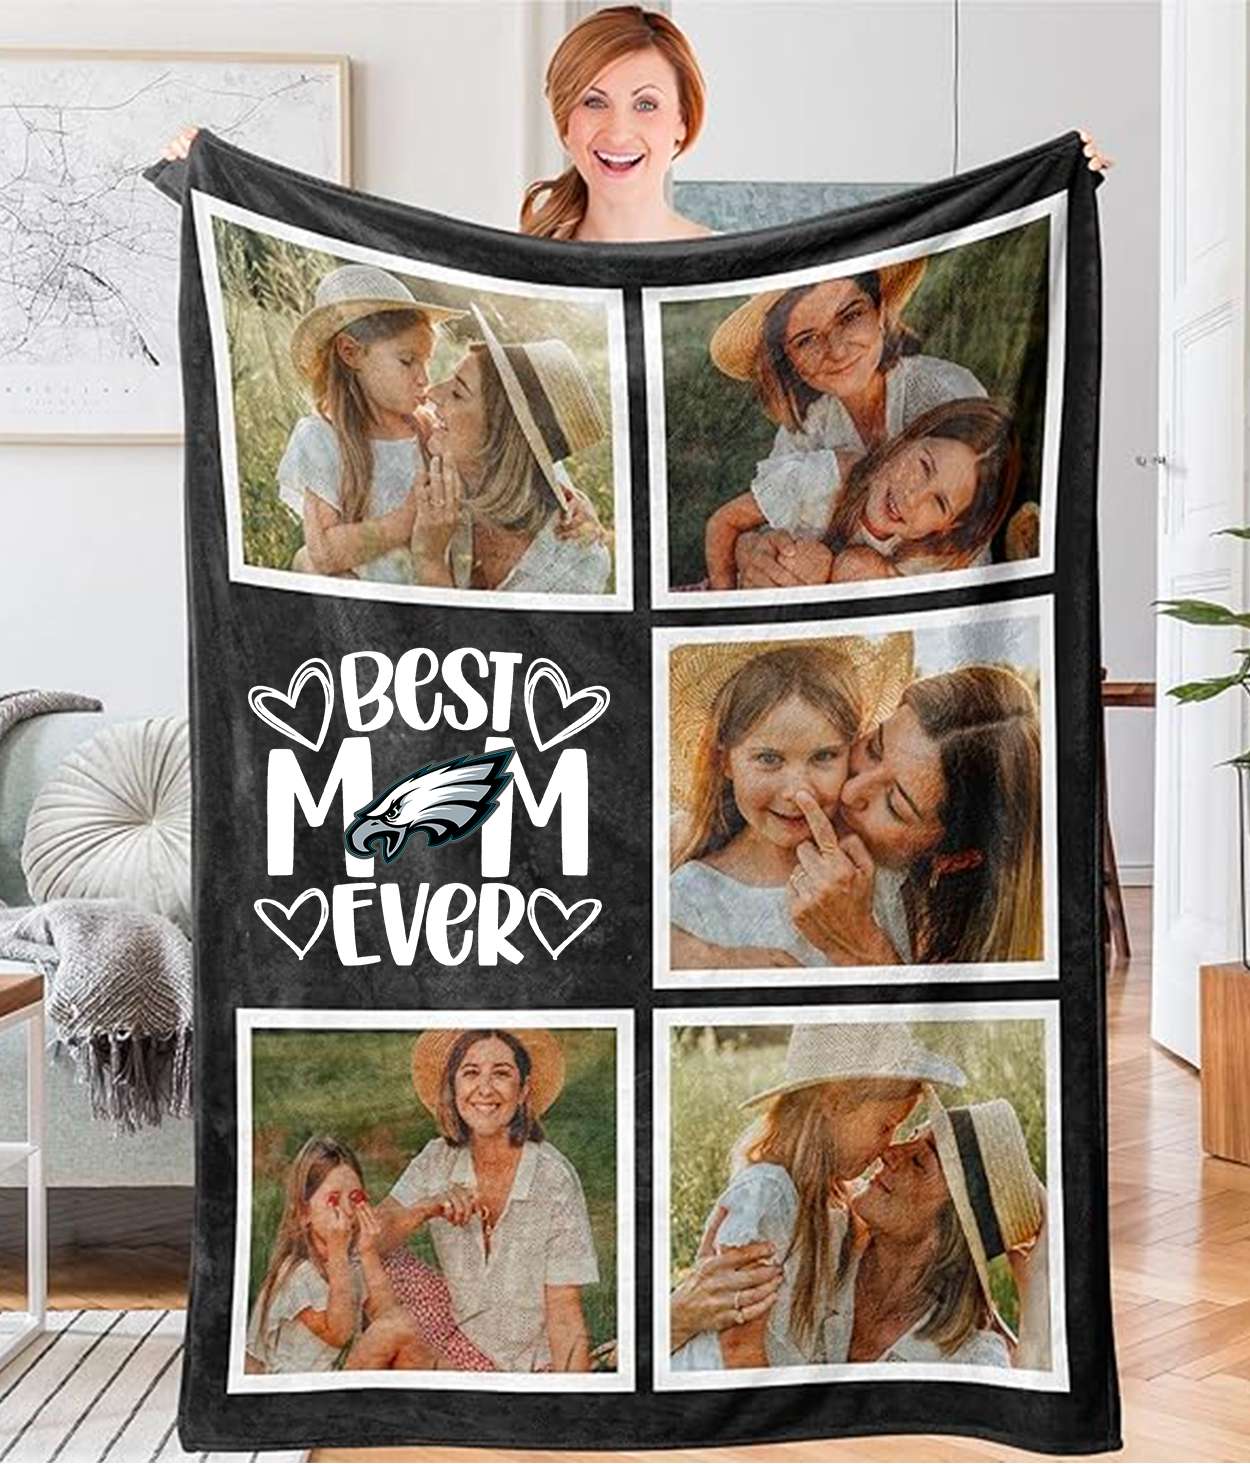 Best Mom Ever - Custom NFL Philadelphia Eagles Blankets with Pictures for Mother's Day Gift